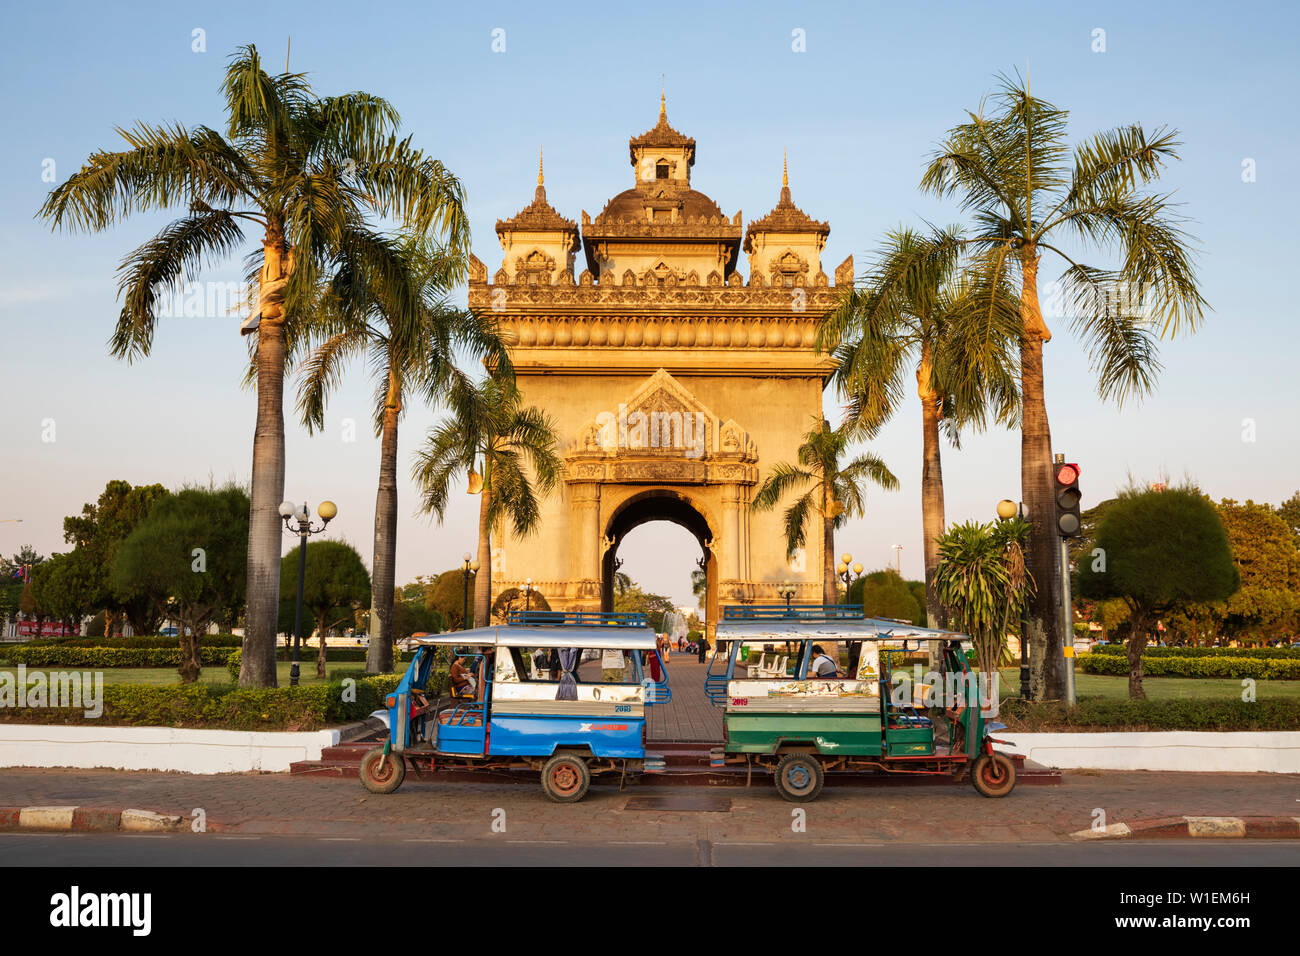 Tuk-tuks parked in front of the Patuxai Victory Monument (Vientiane Arc de Triomphe), Vientiane, Laos, Indochina, Southeast Asia, Asia Stock Photo